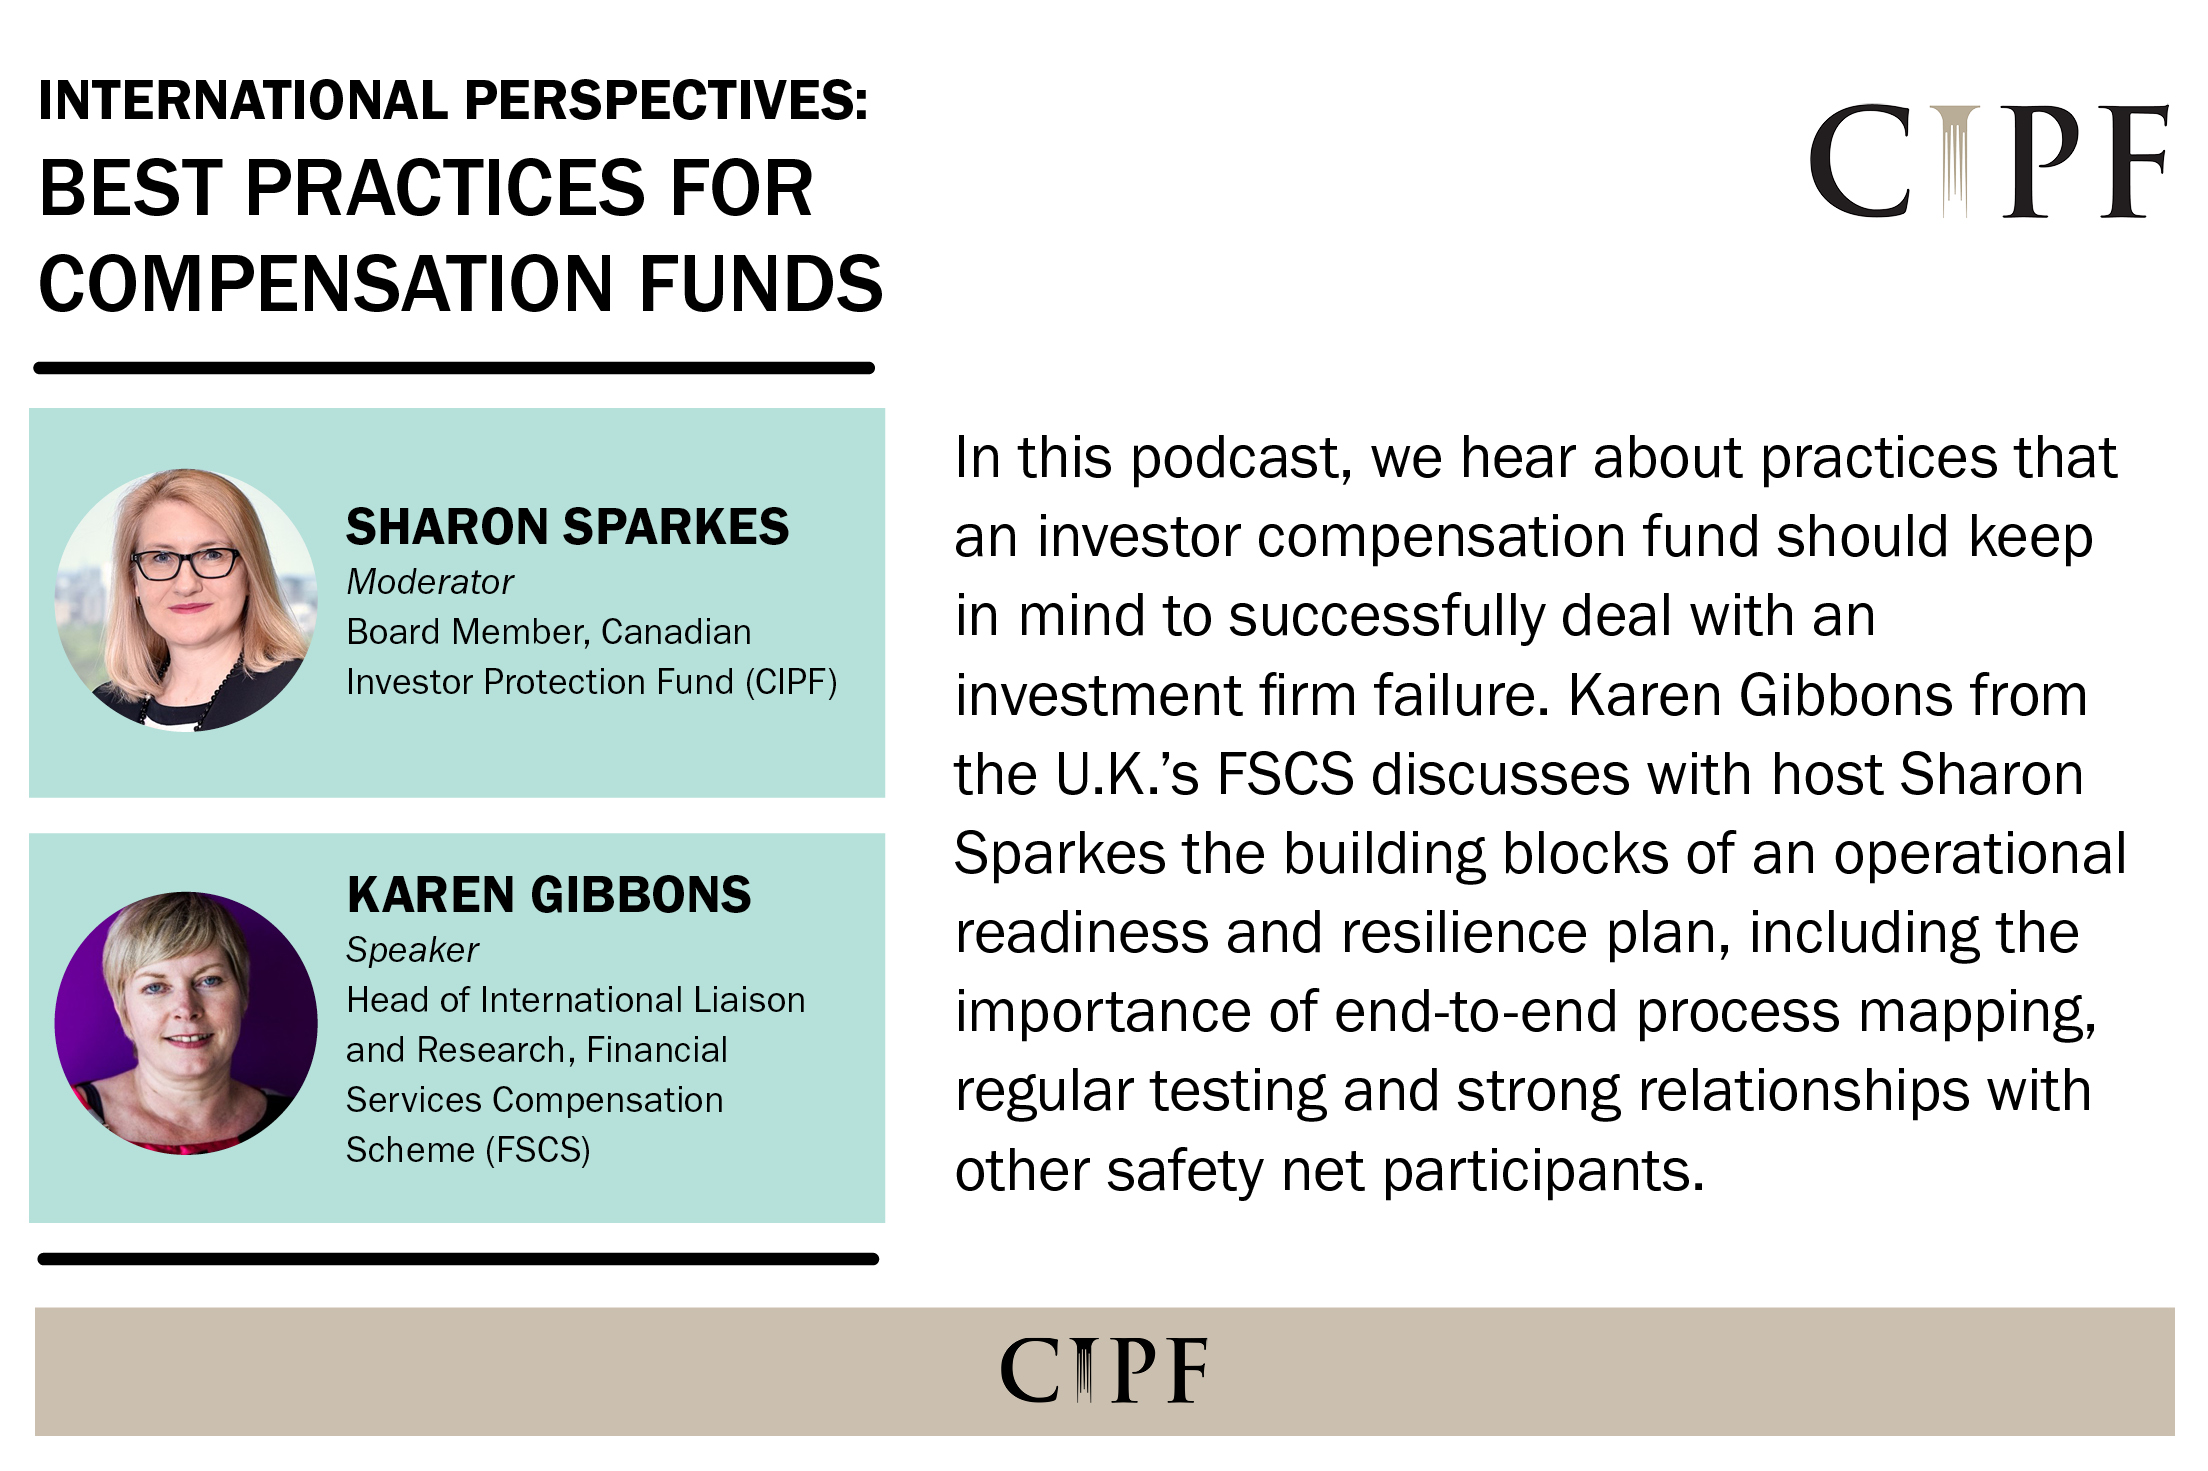 International Perspectives: Best Practices for Compensation Funds